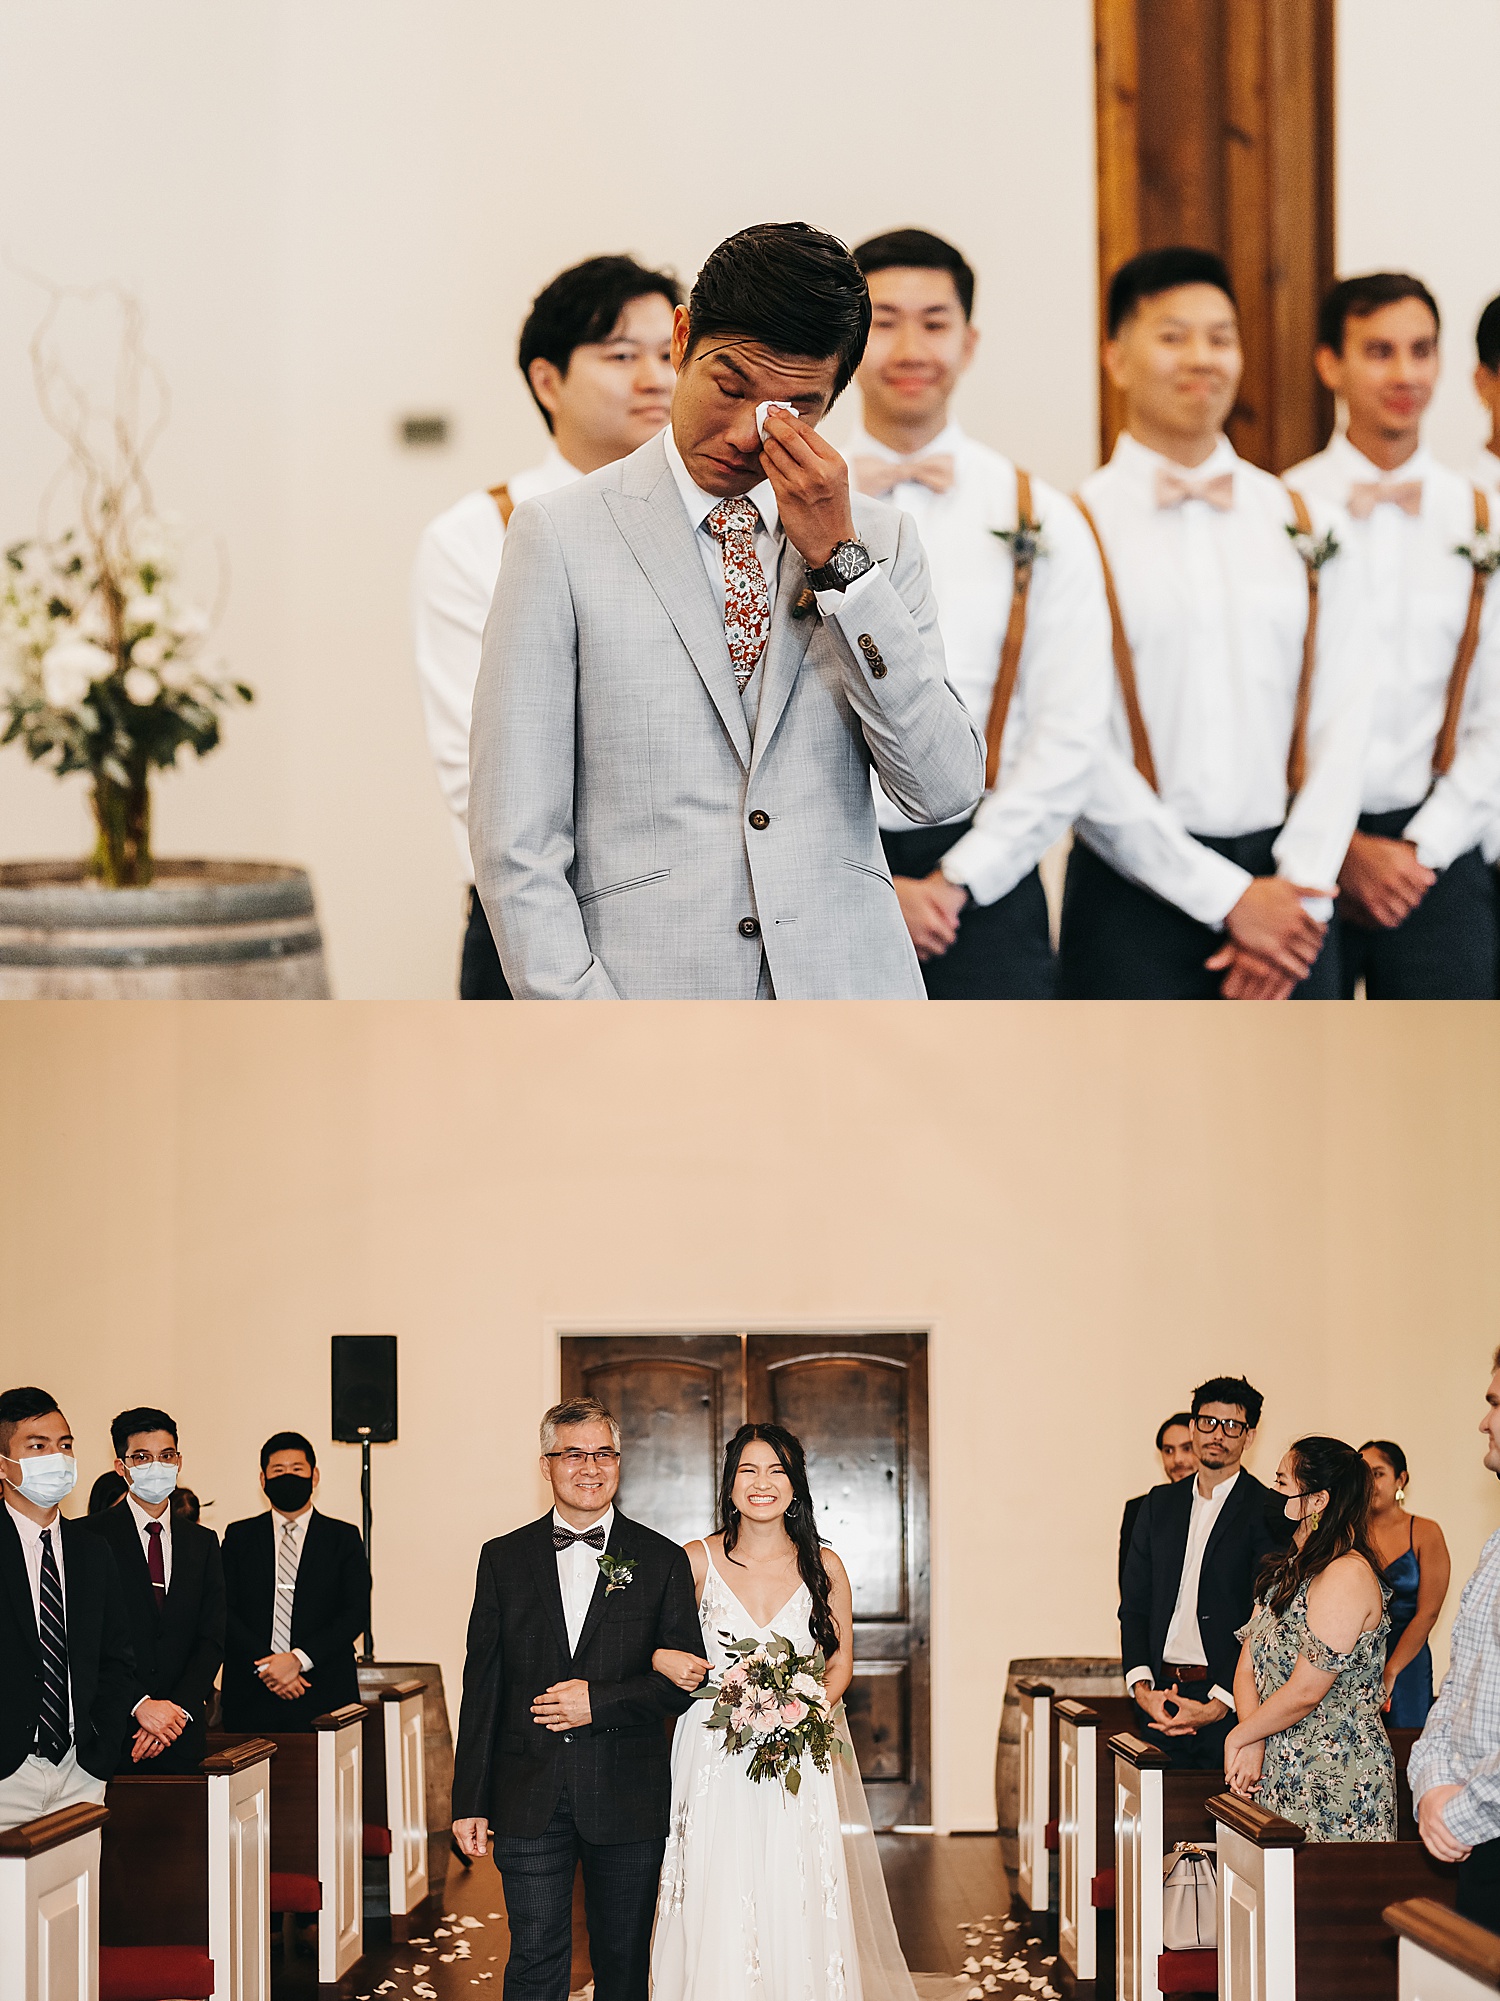 Groom's reaction to bride walking down the aisle with father of the bride. 